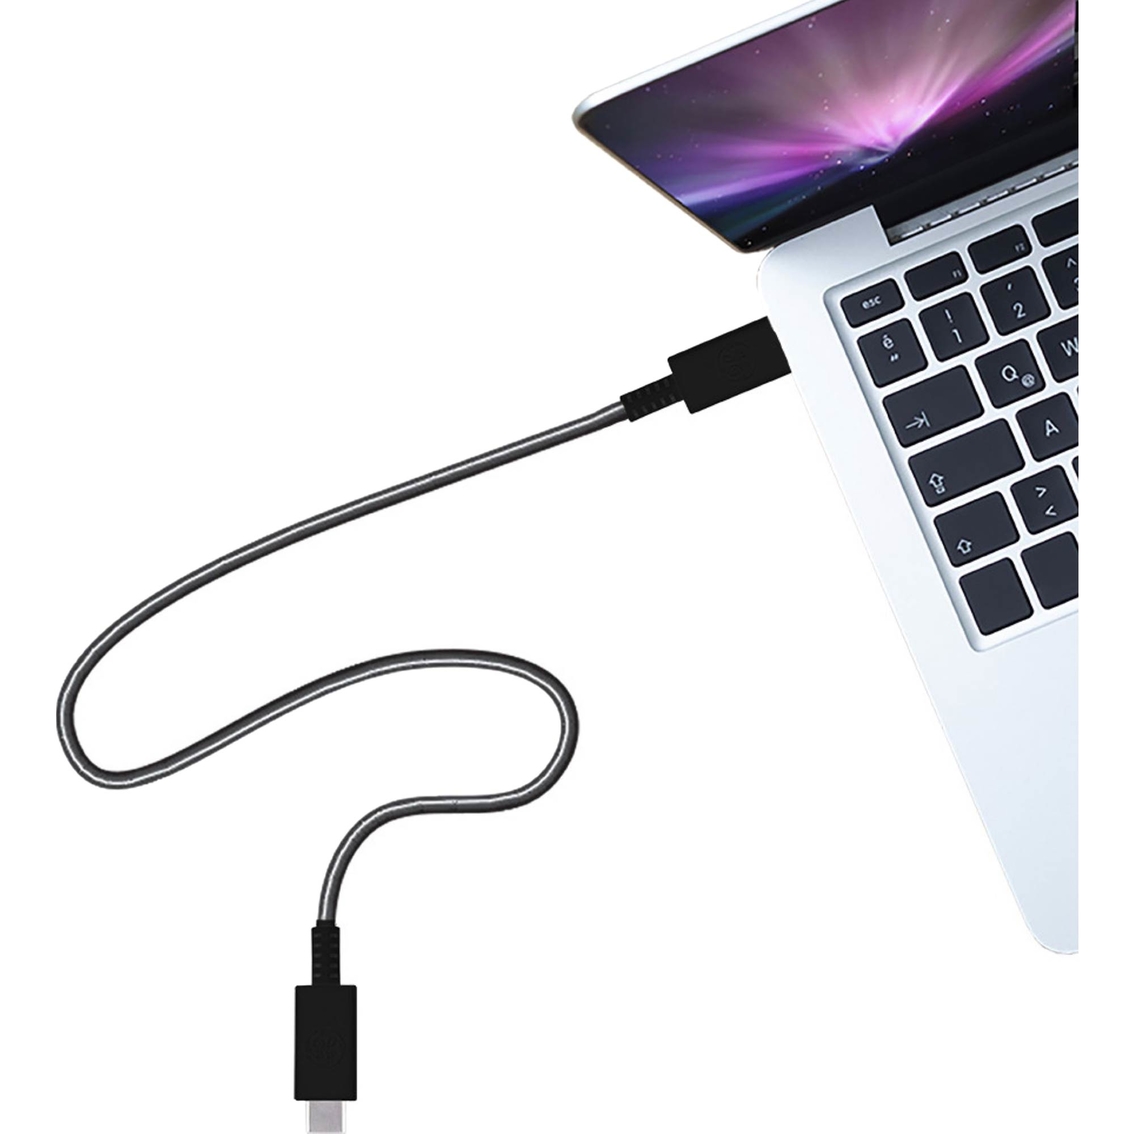 GE USB C 2.0 Charging Cable 6.5 ft. - Image 4 of 4